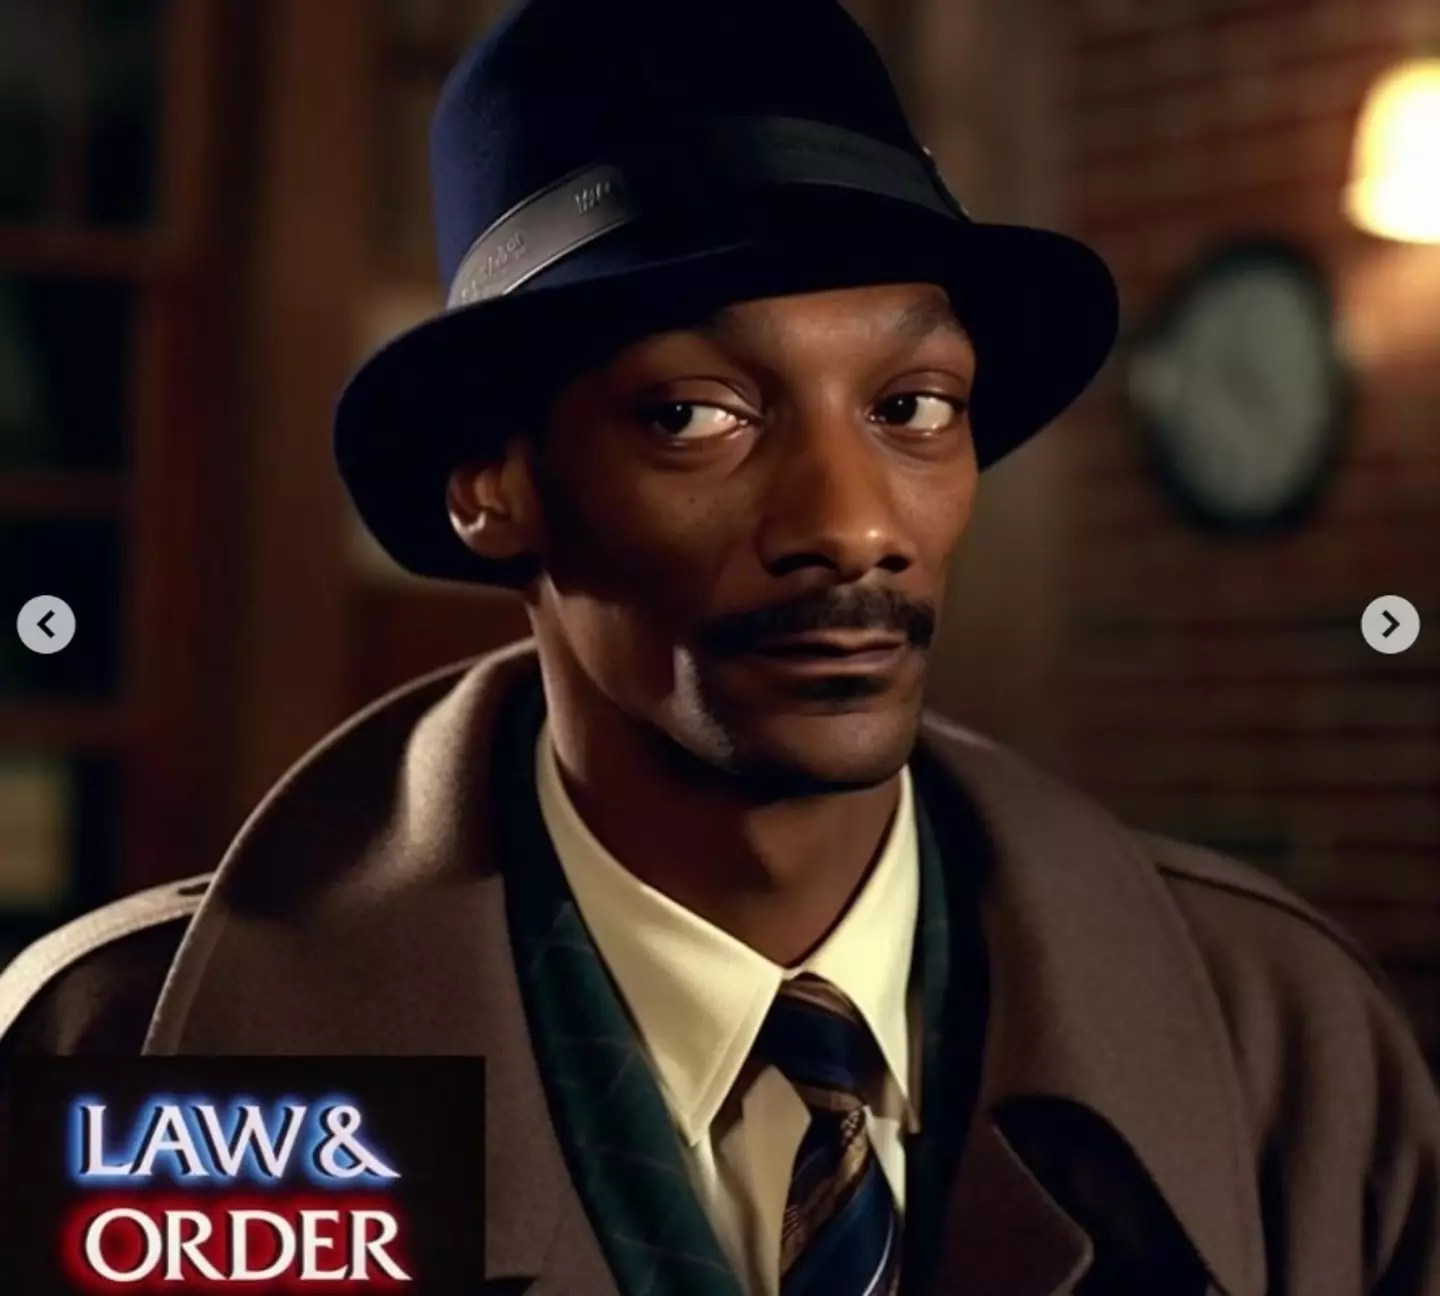 Snoop Dogg is looking suave in that suit, maybe someone should offer to make him a TV detective after all?